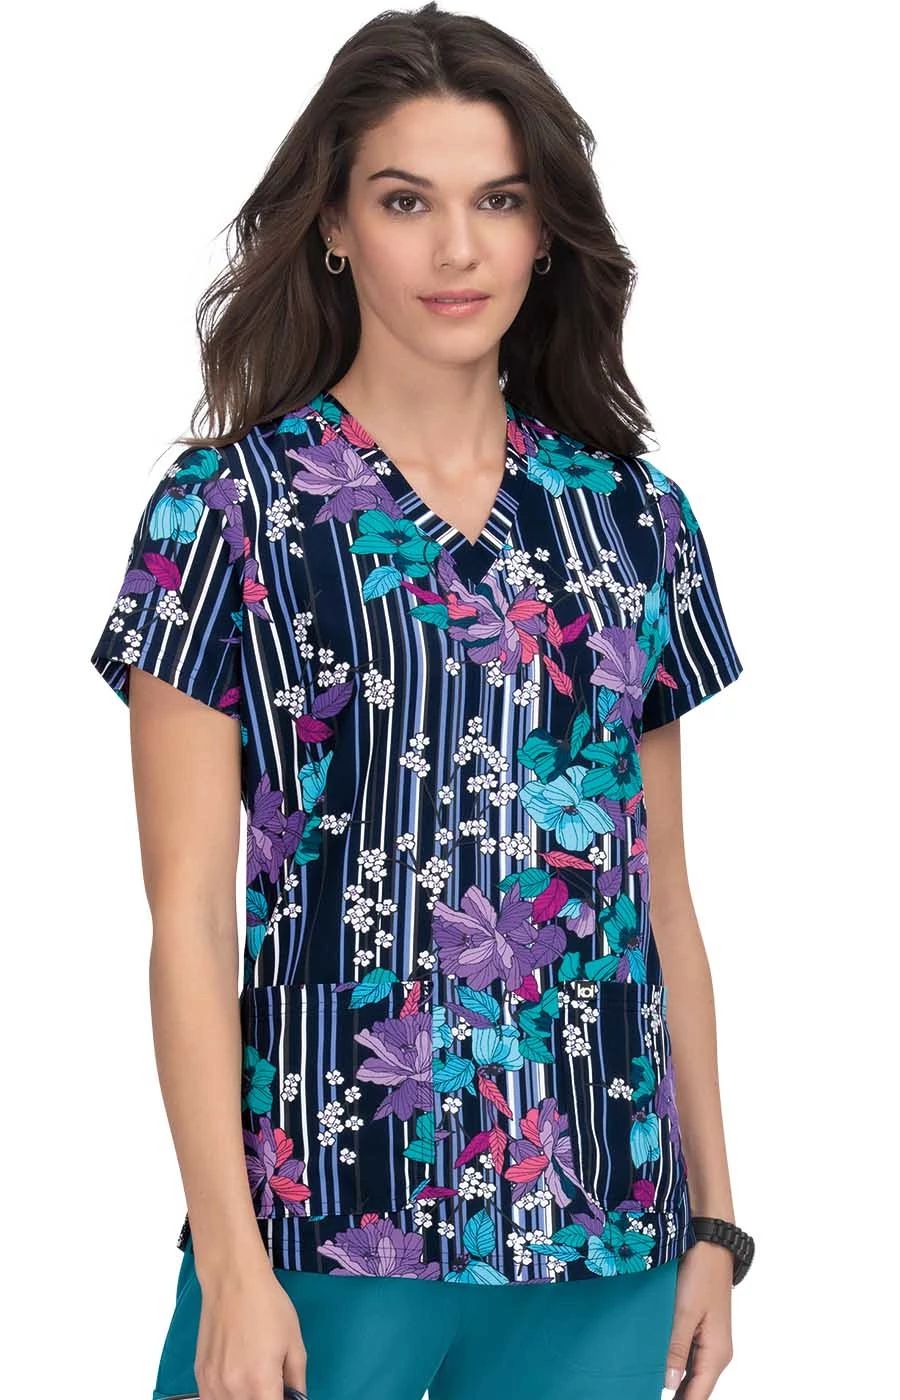 early-energy-top-striped-floral